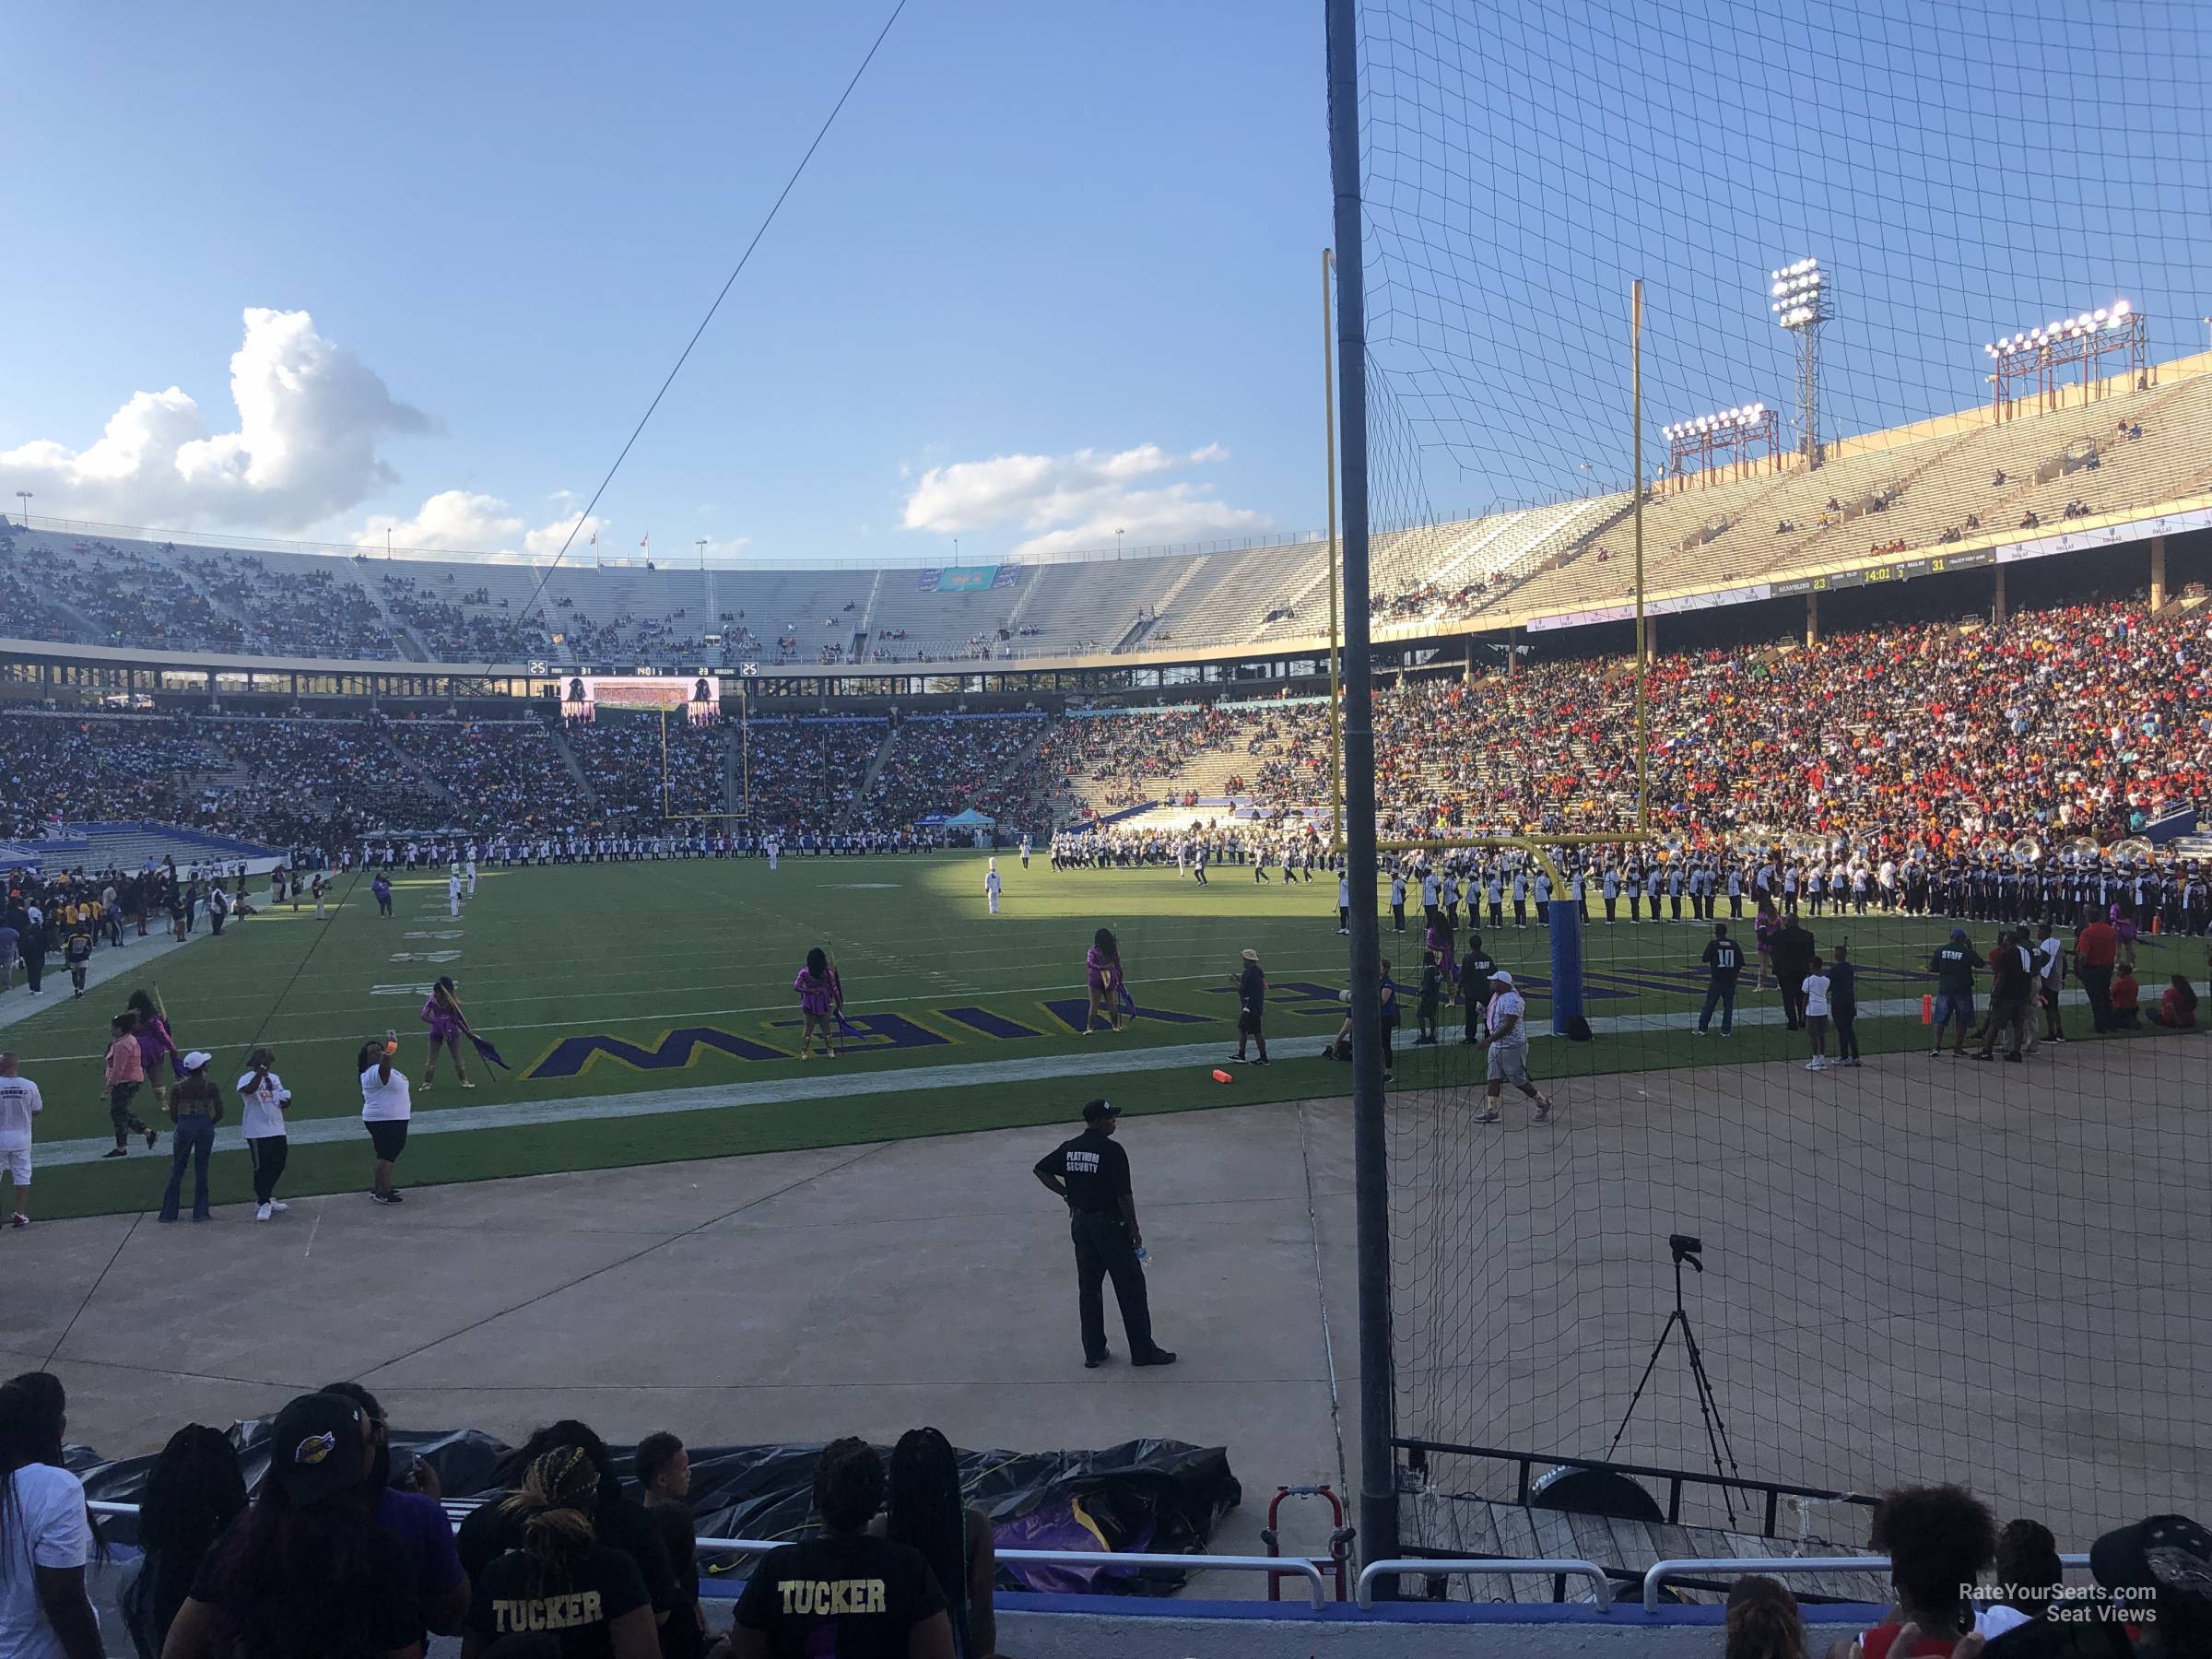 section 35, row 10 seat view  - cotton bowl